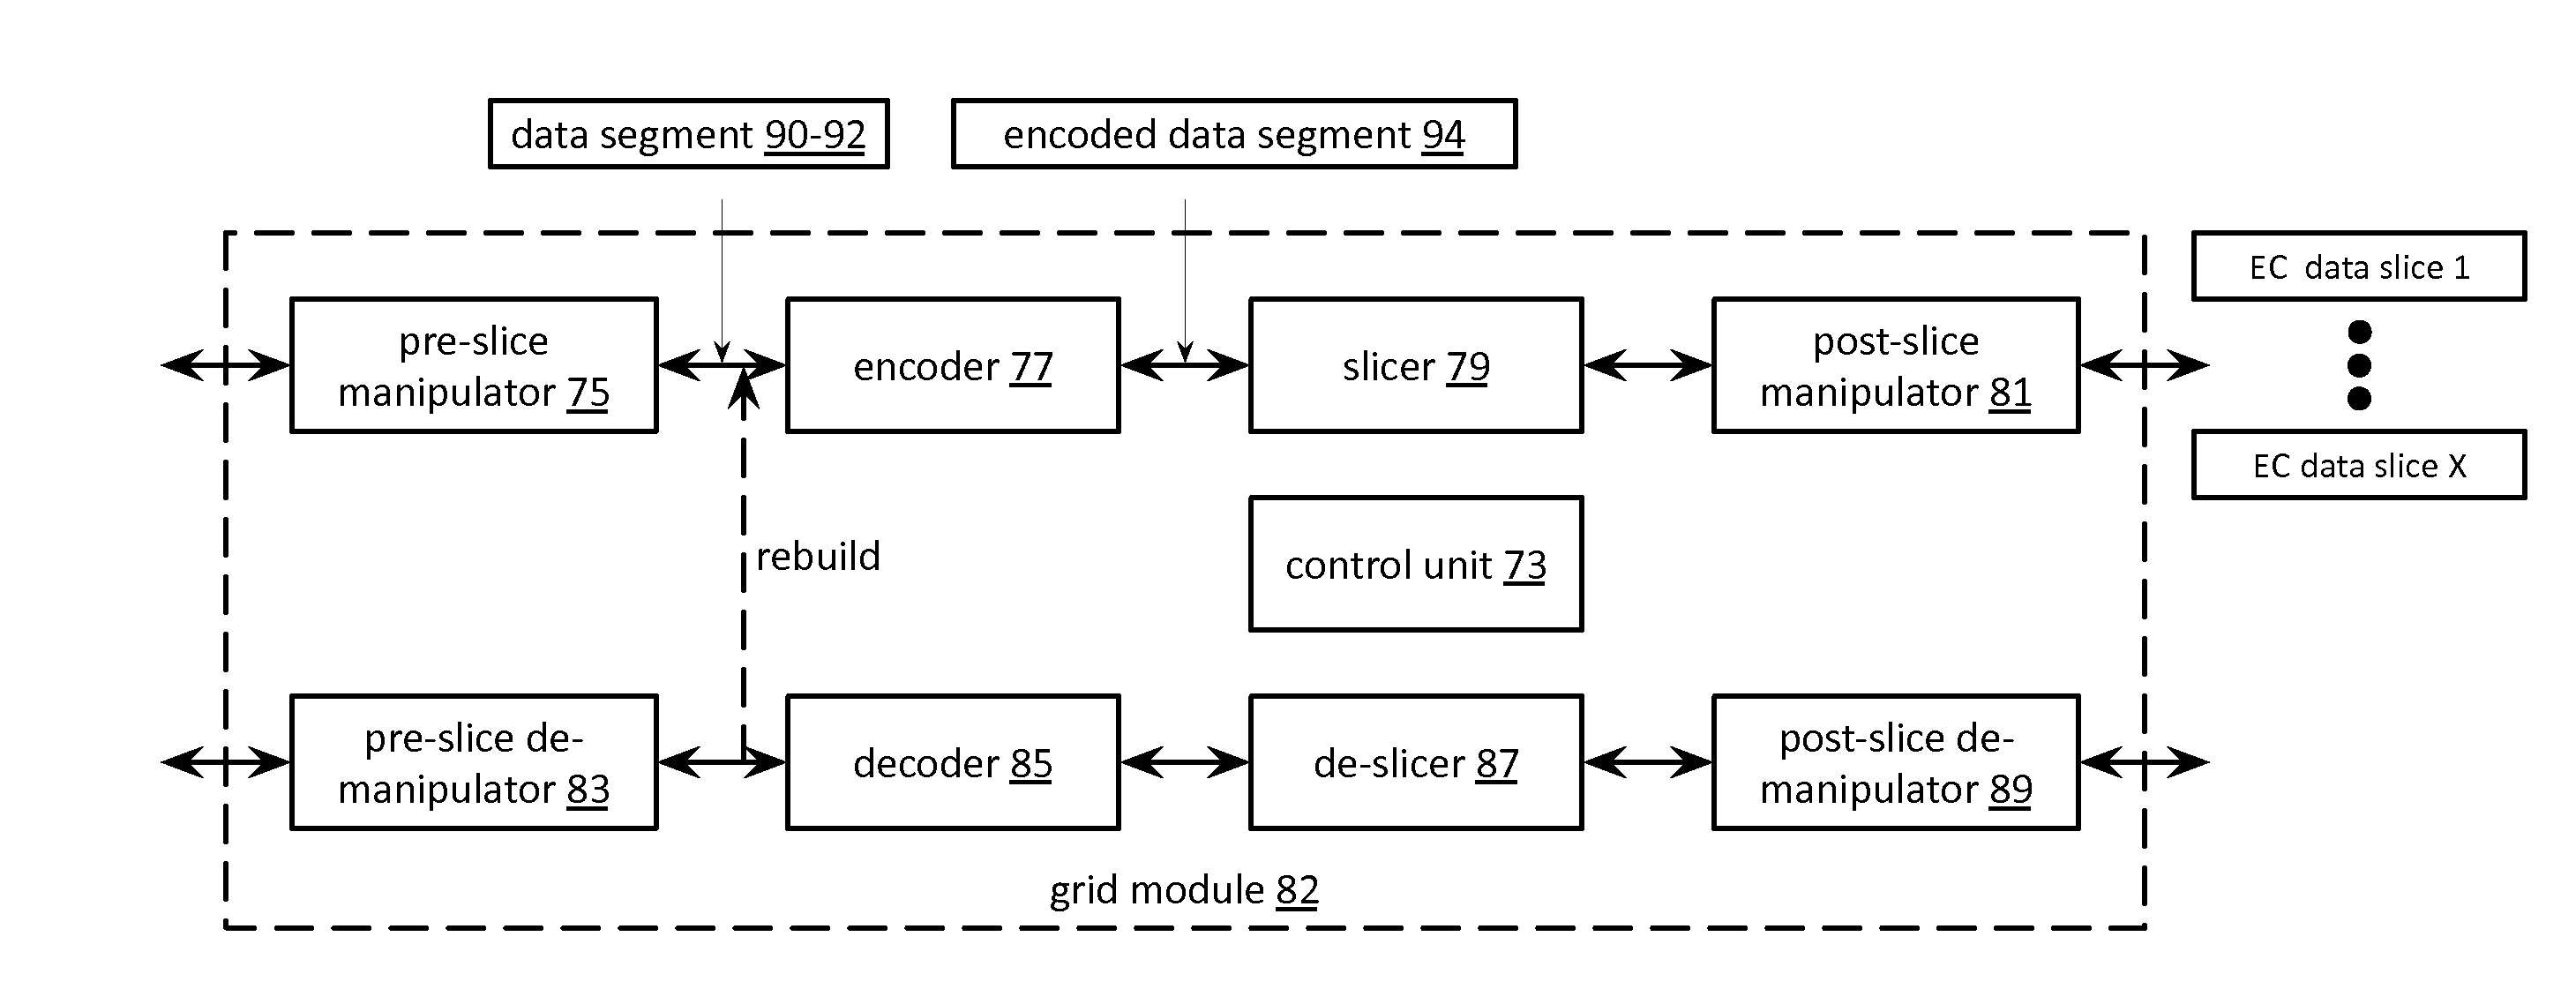 Utilizing local memory and dispersed storage memory to access encoded data slices